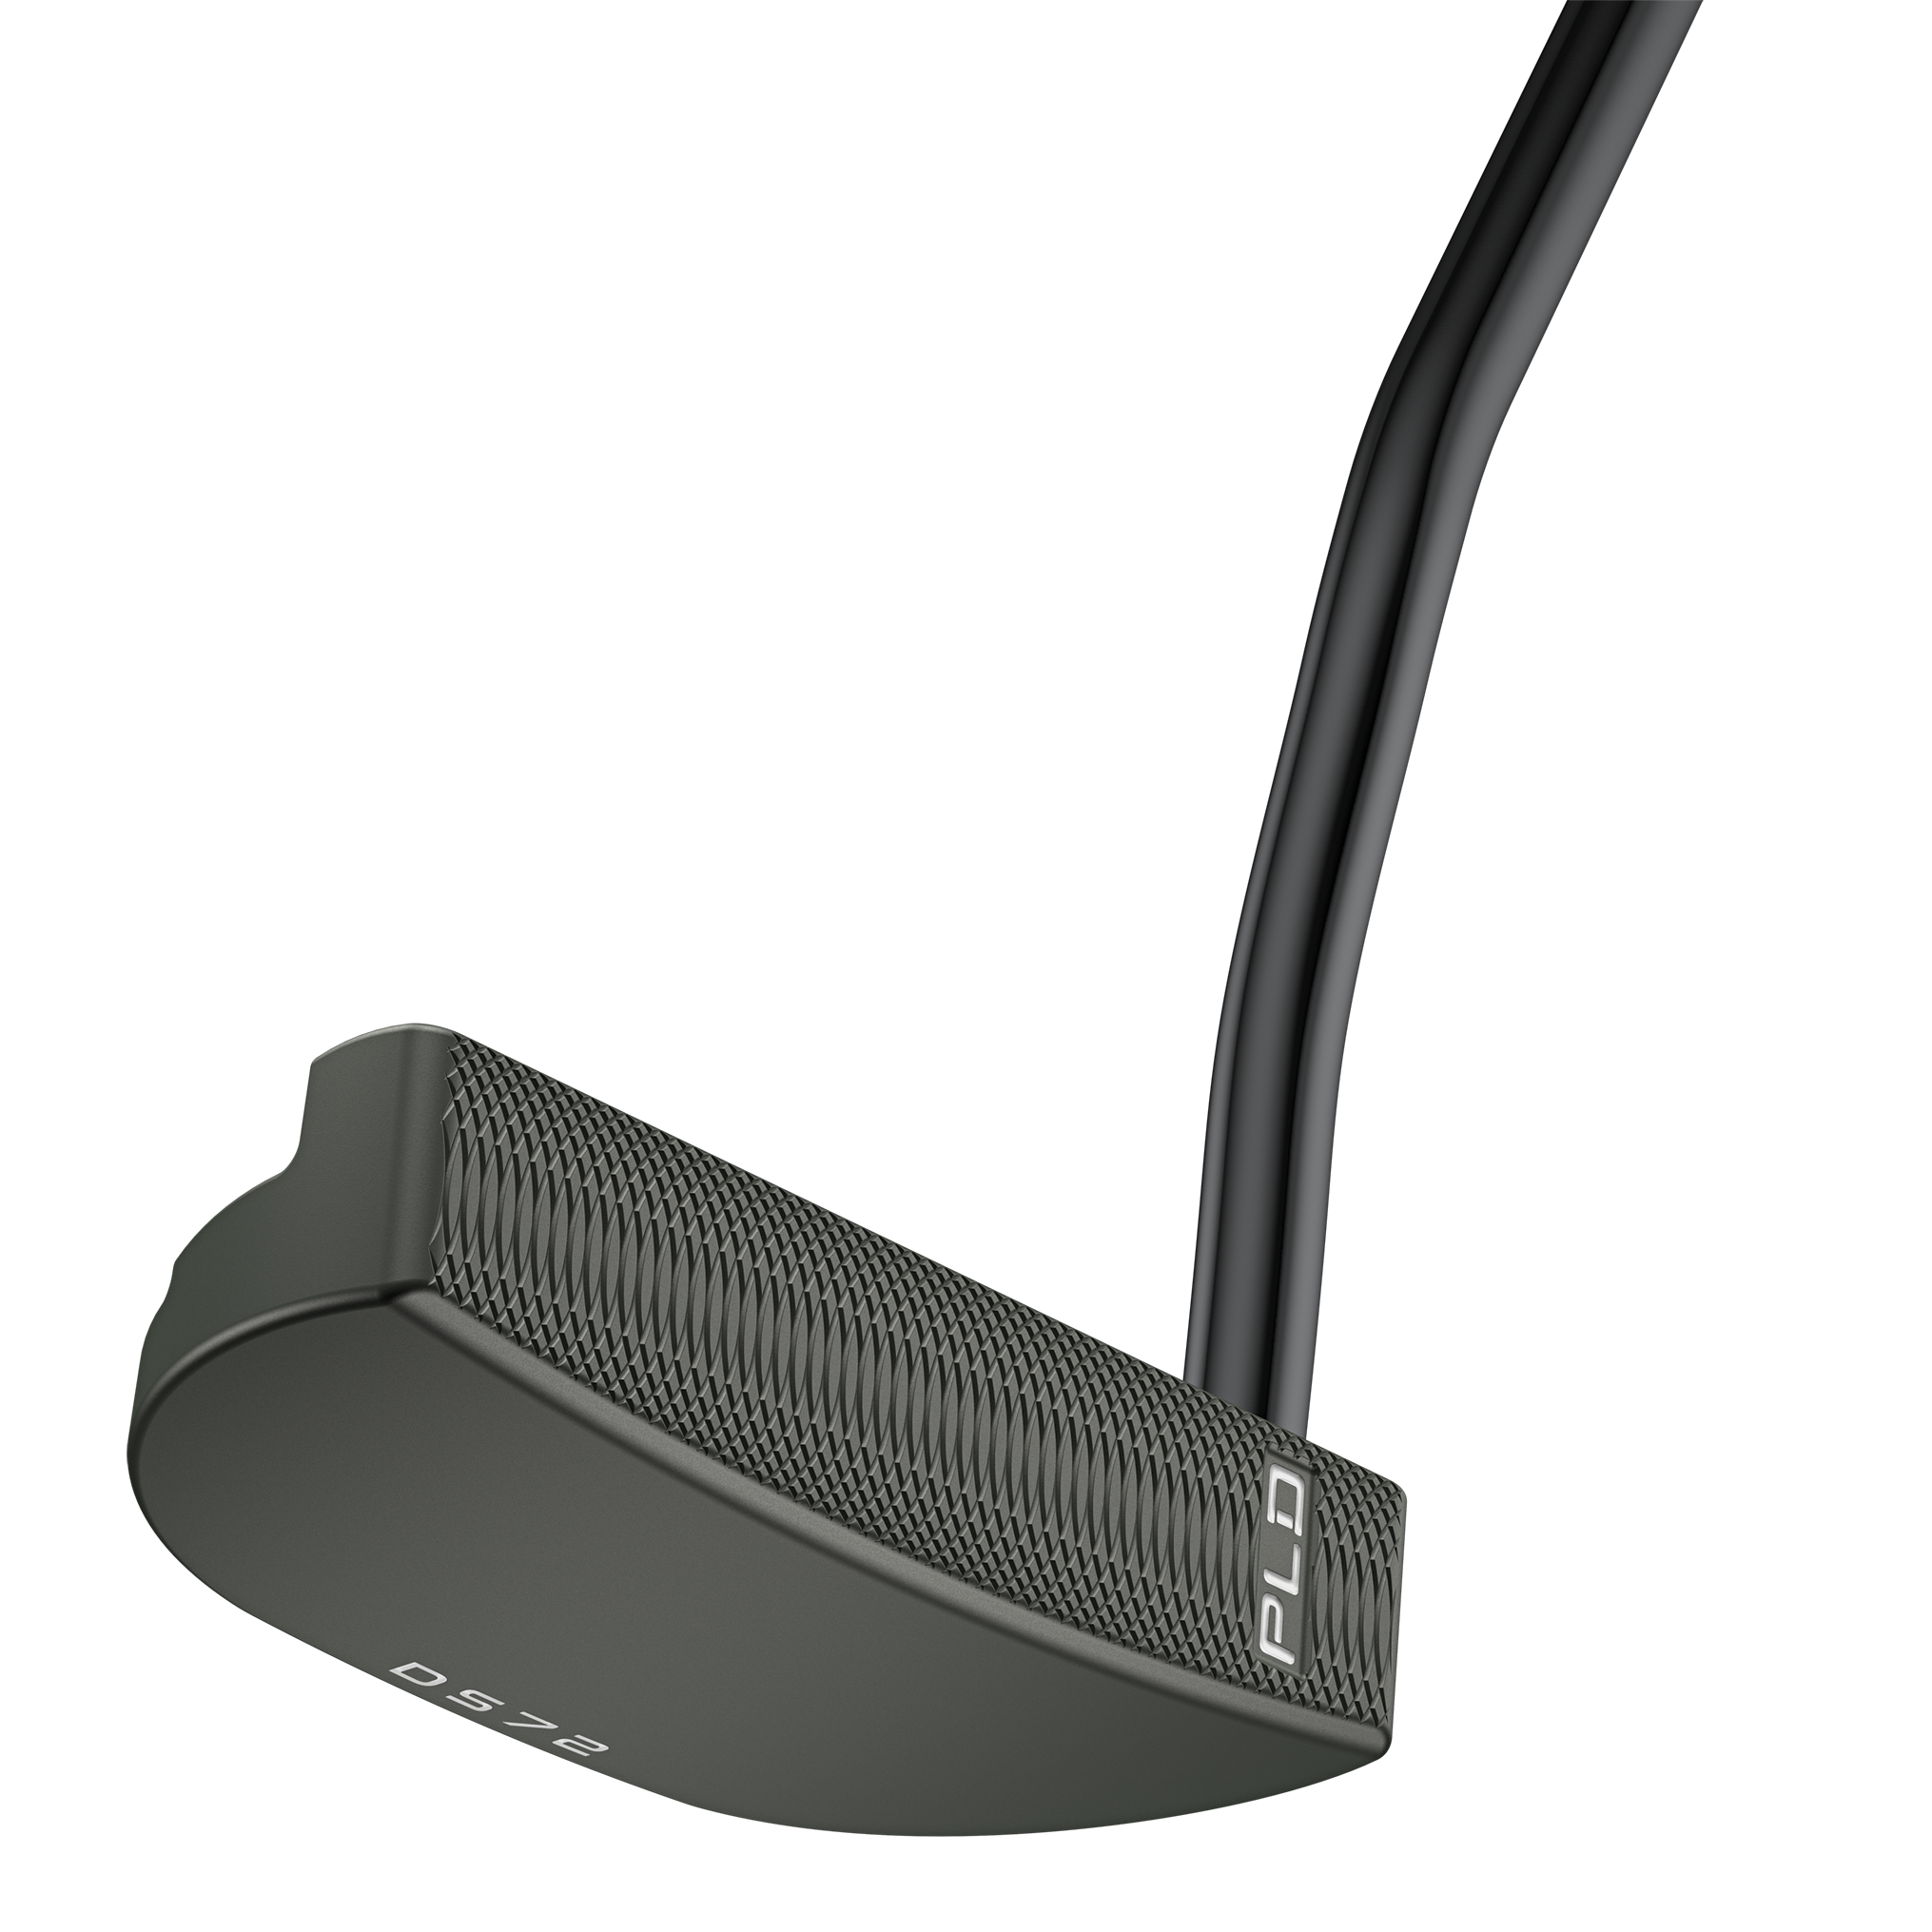 PING 2024 PLD Milled DS72 Custom Putter